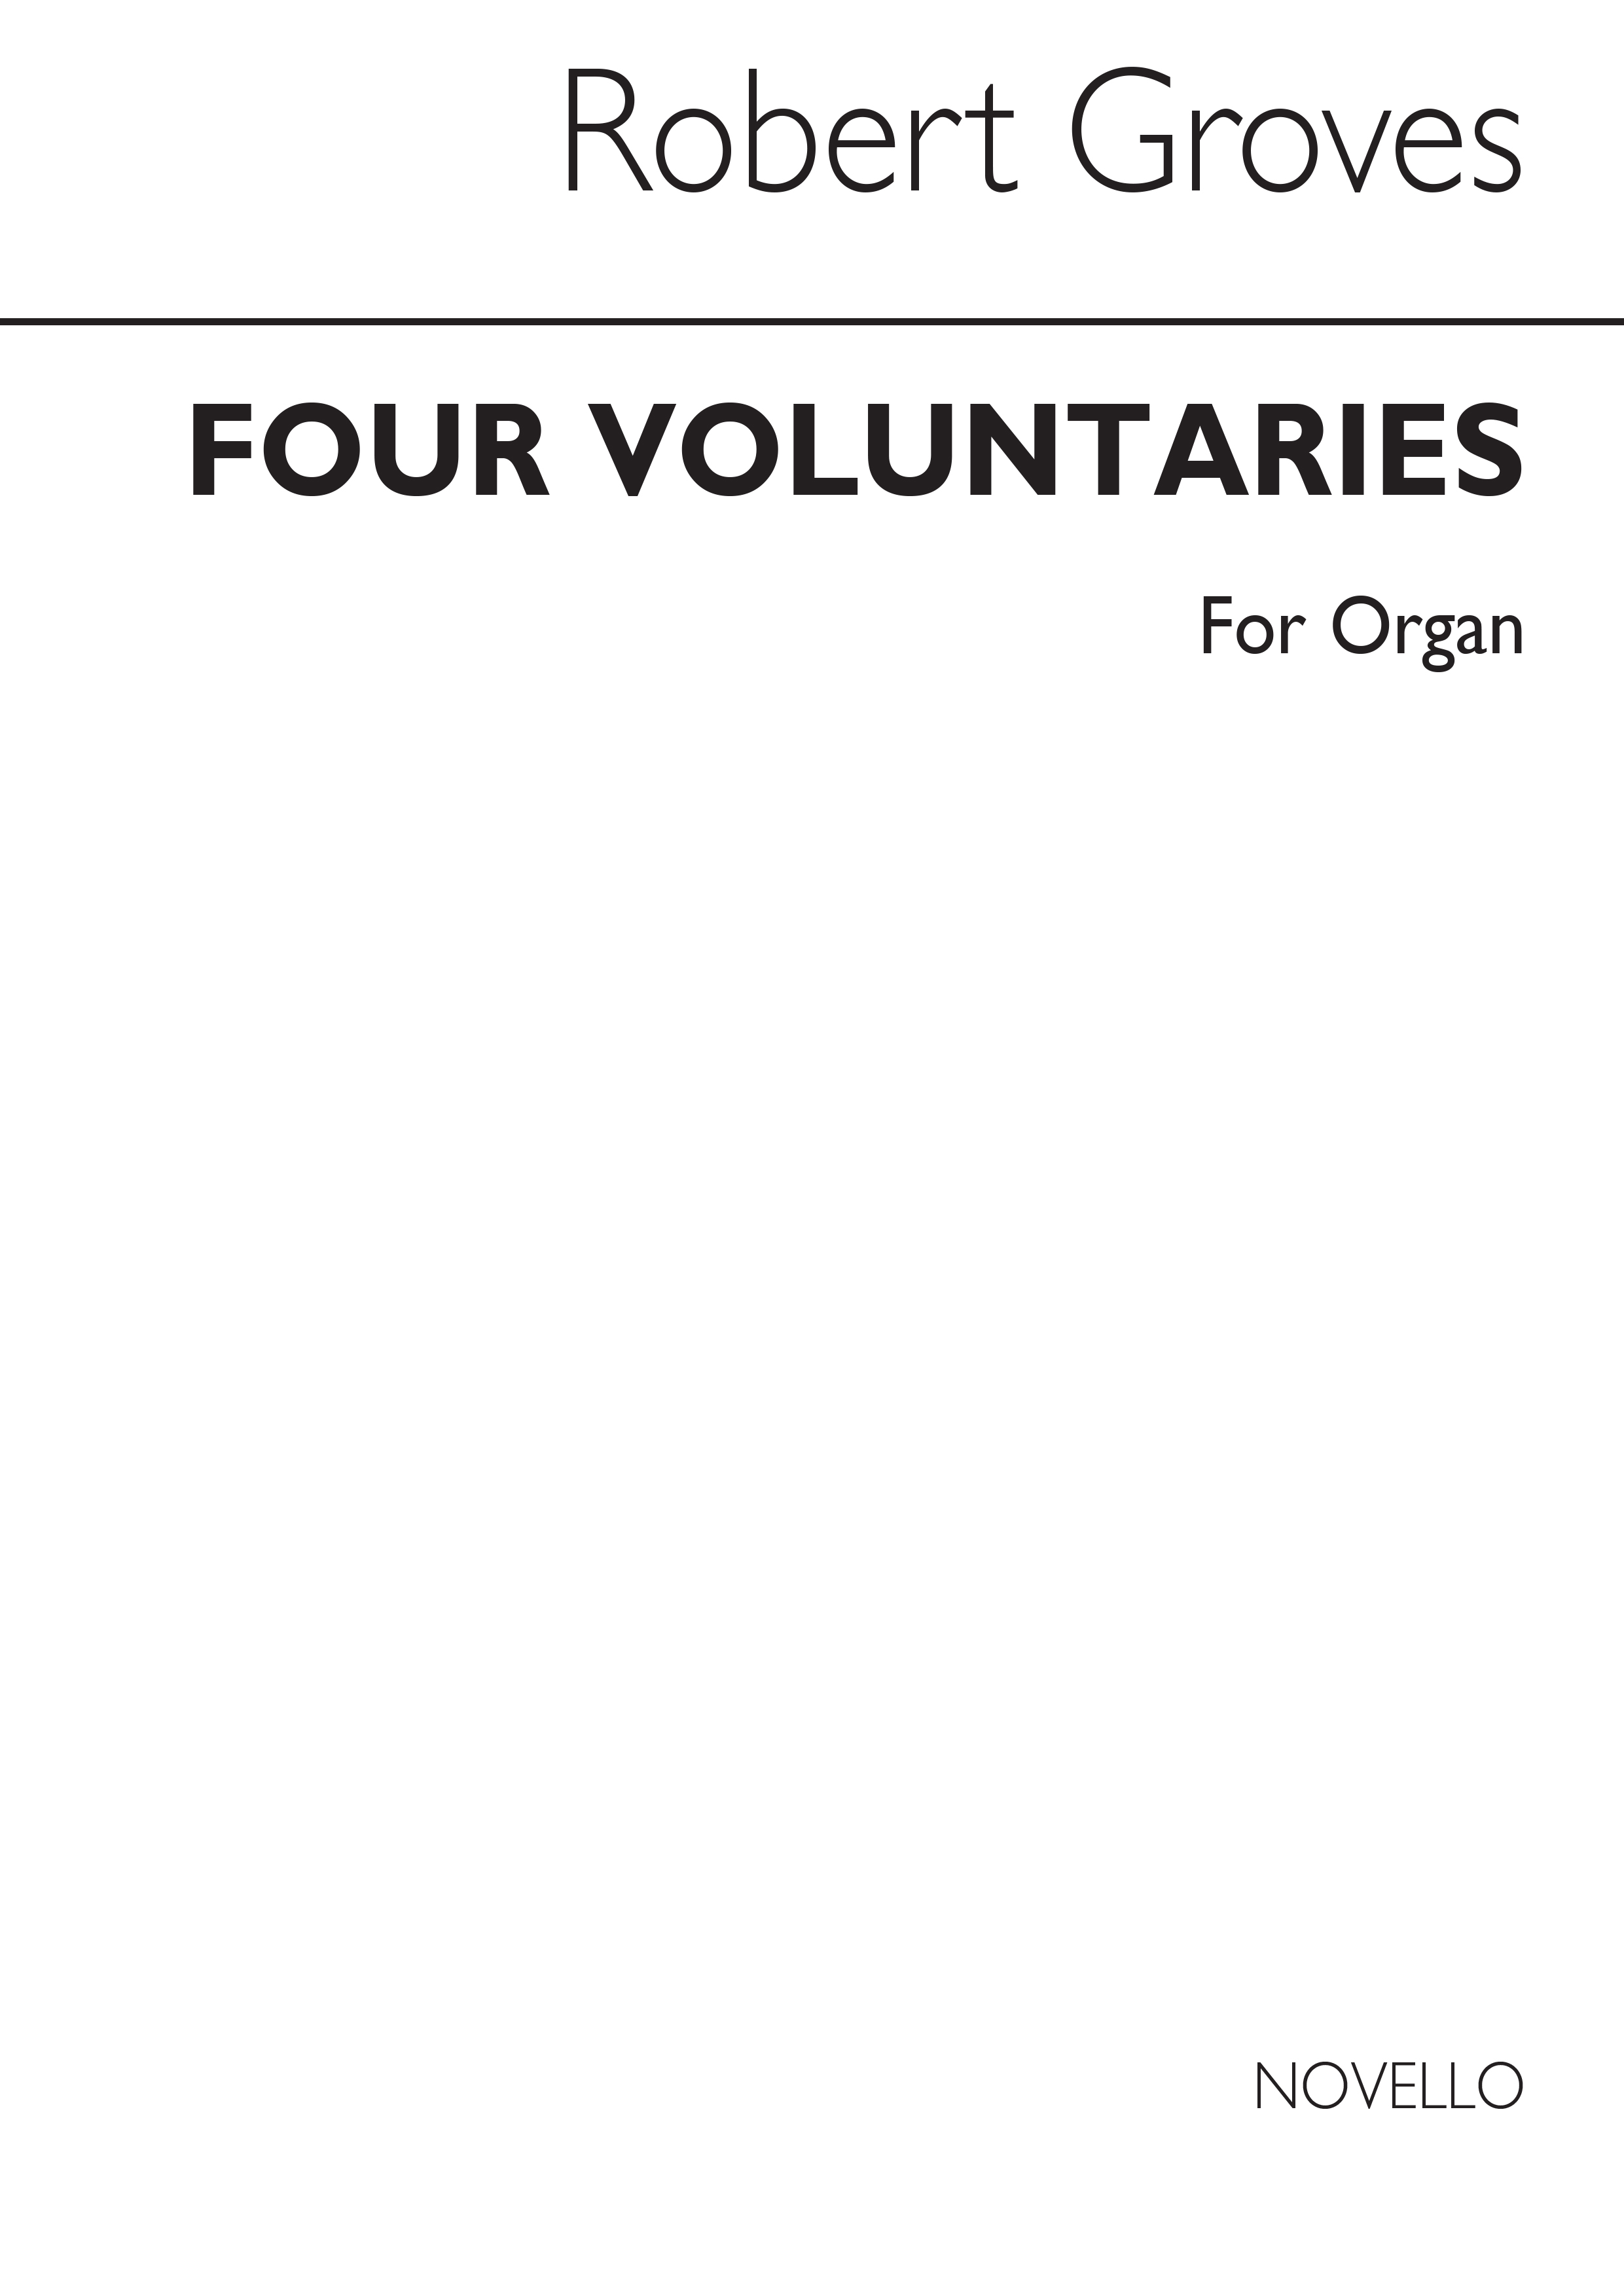 Robert Groves: Four Voluntaries With Or Without Pedals: Organ: Instrumental